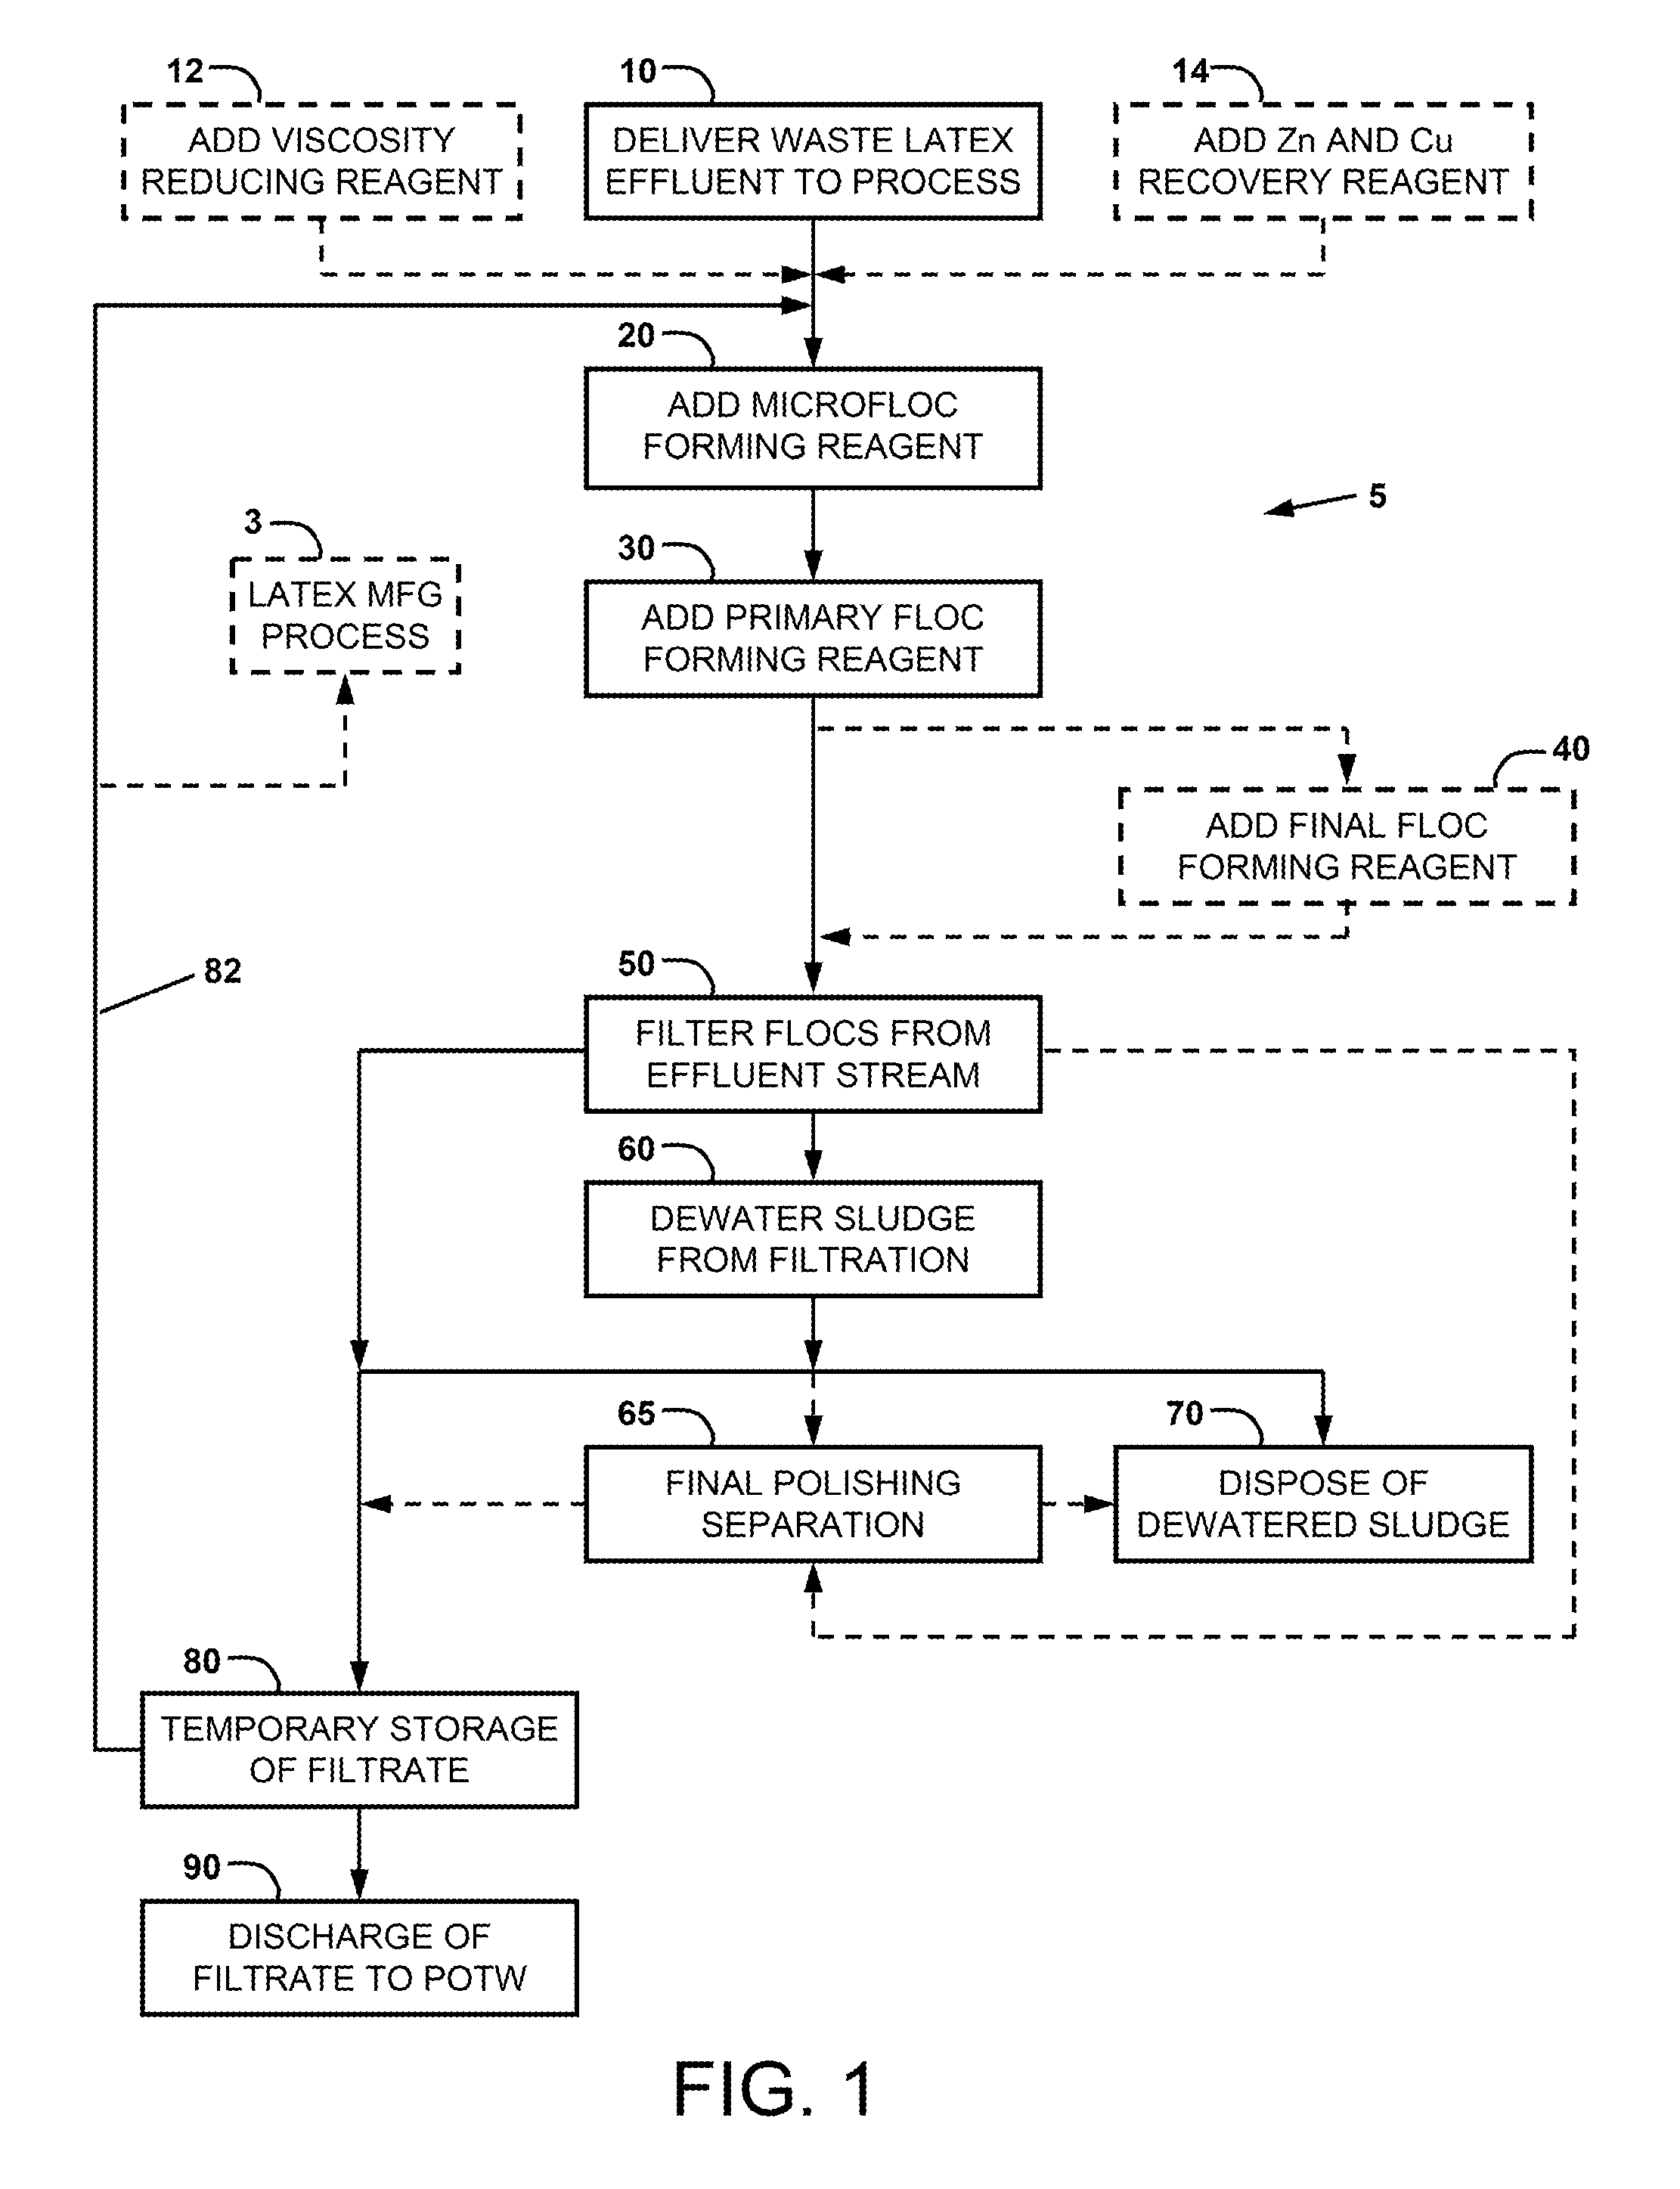 Method for treatment of waste latex